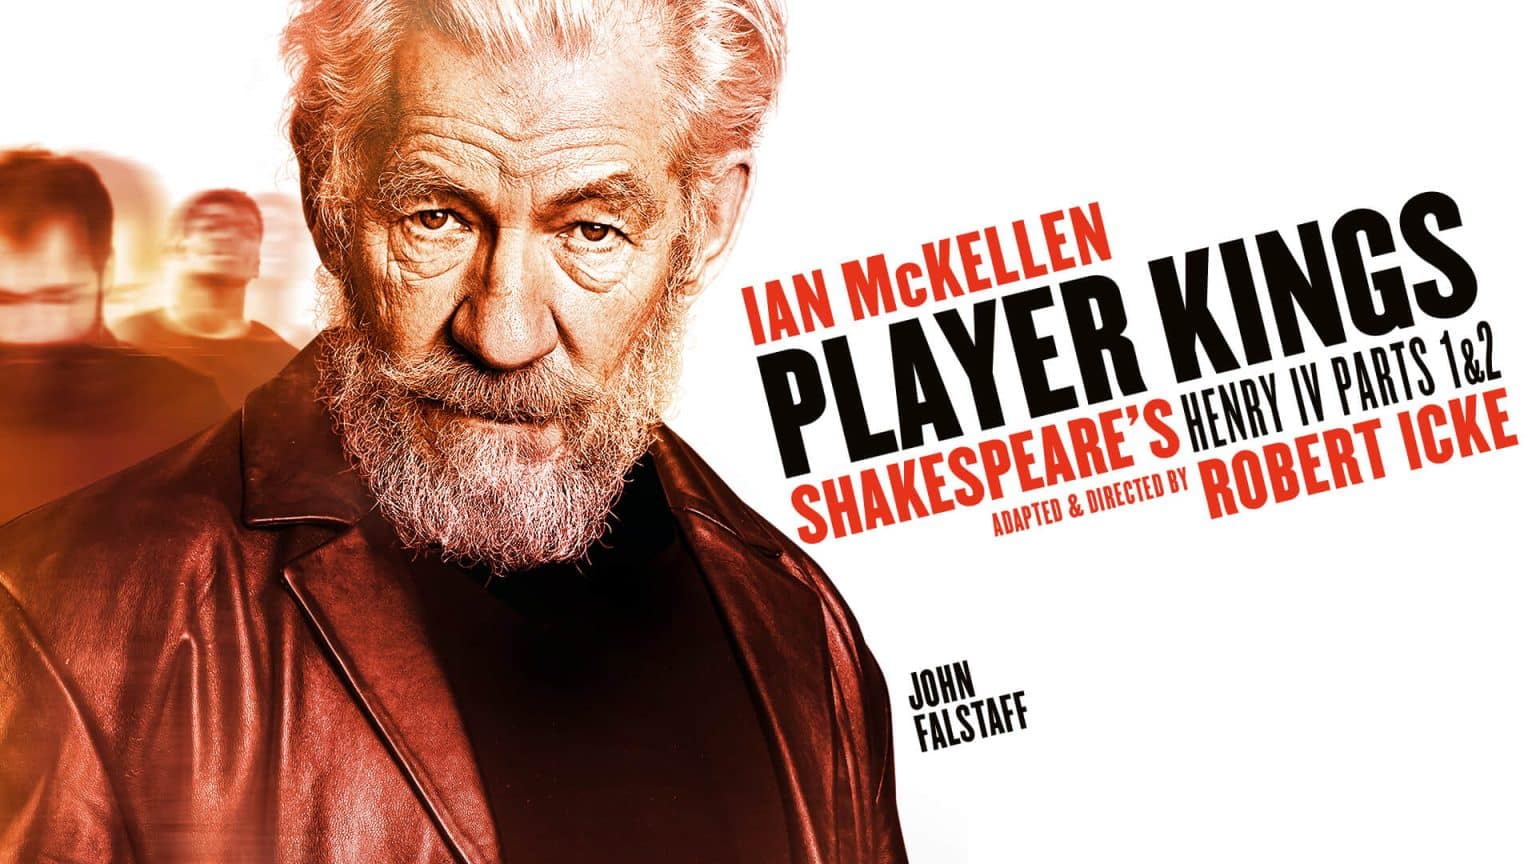 Ian McKellen stars in Player Kings: an adaptation of Shakespeare's Henry VI parts 1 & 2.